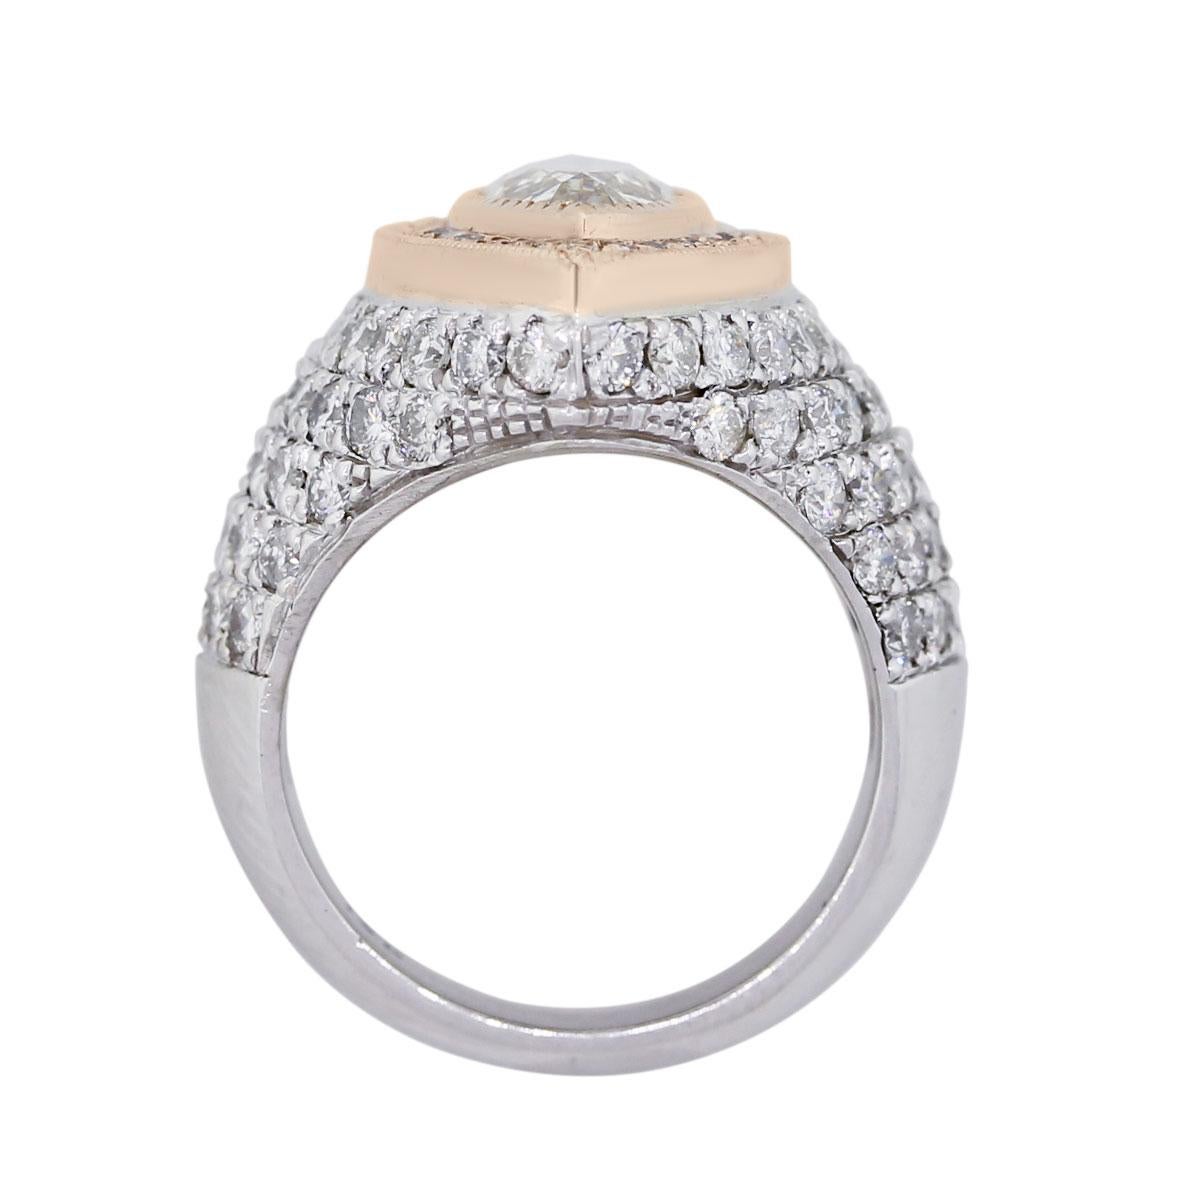 Material: 14k white and rose gold
Center Diamond Details: EGL certified 3.06ctw marquise shape diamond. Diamond is K in color and SI3 in clarity. EGL cert. #US76981801
Additional Diamond Details: Approximately 2.79ctw of round brilliant